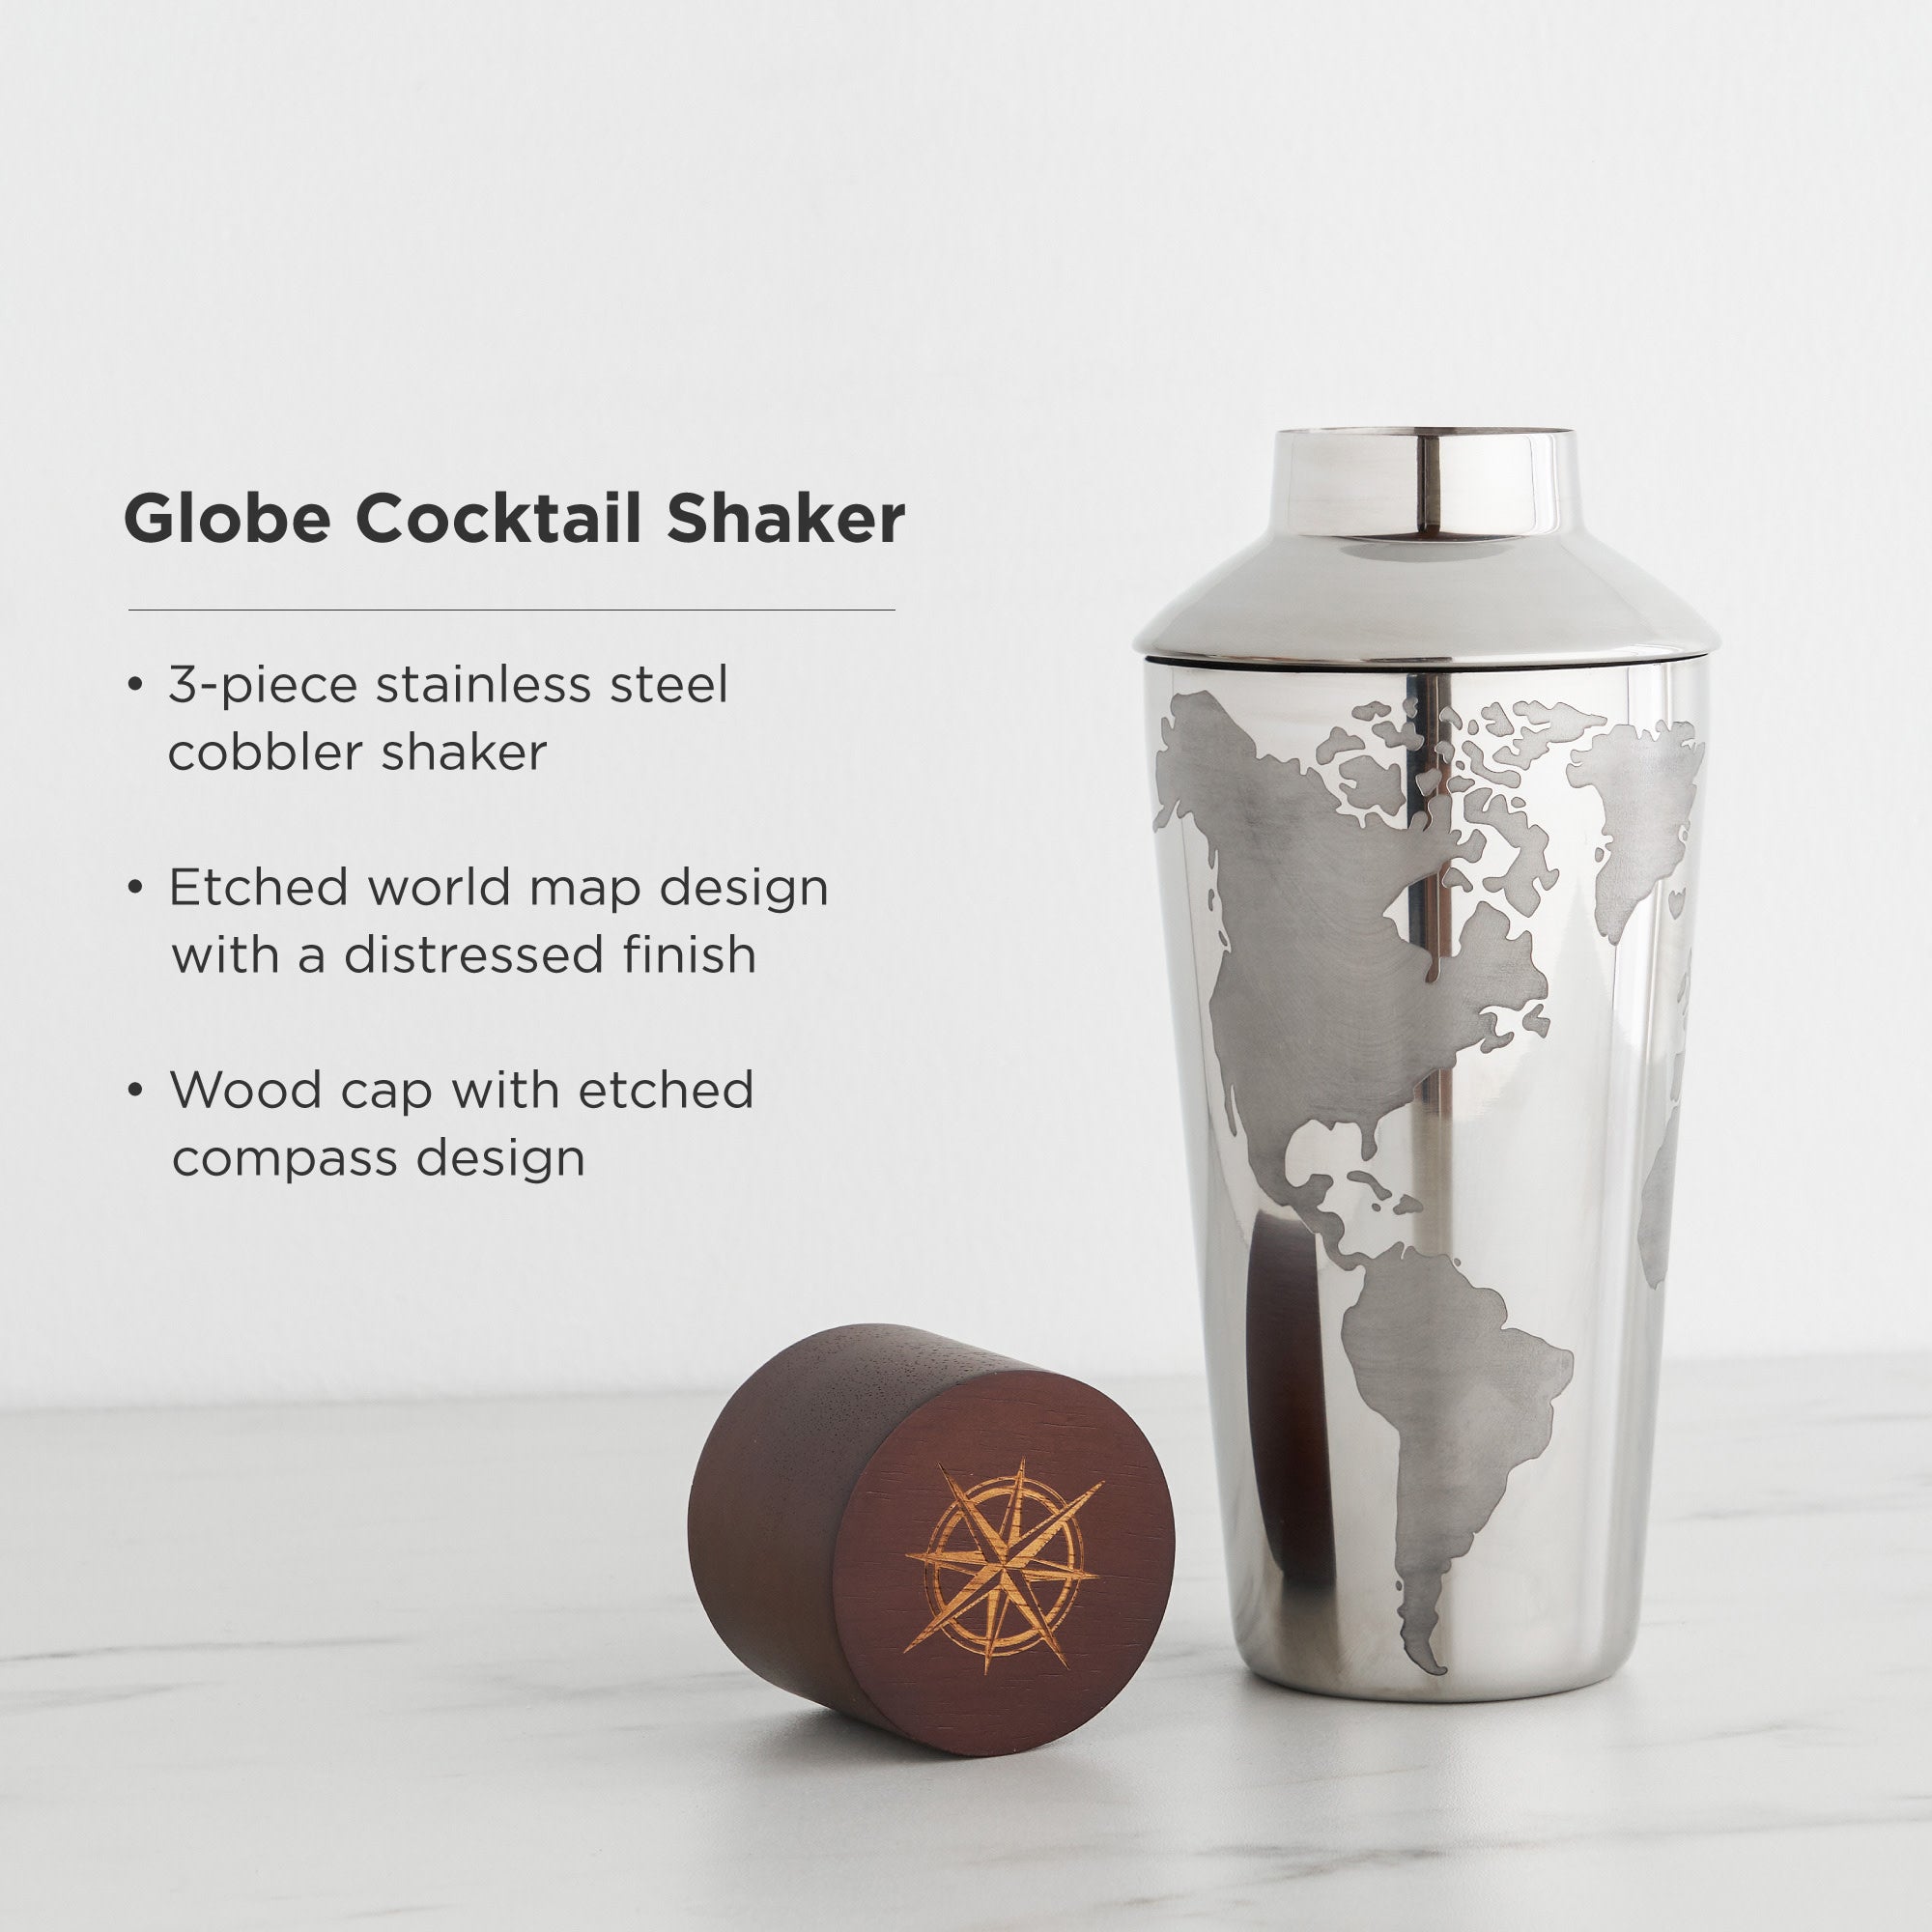 Cocktail Shakers: Boston & Cobbler Drink Shakers